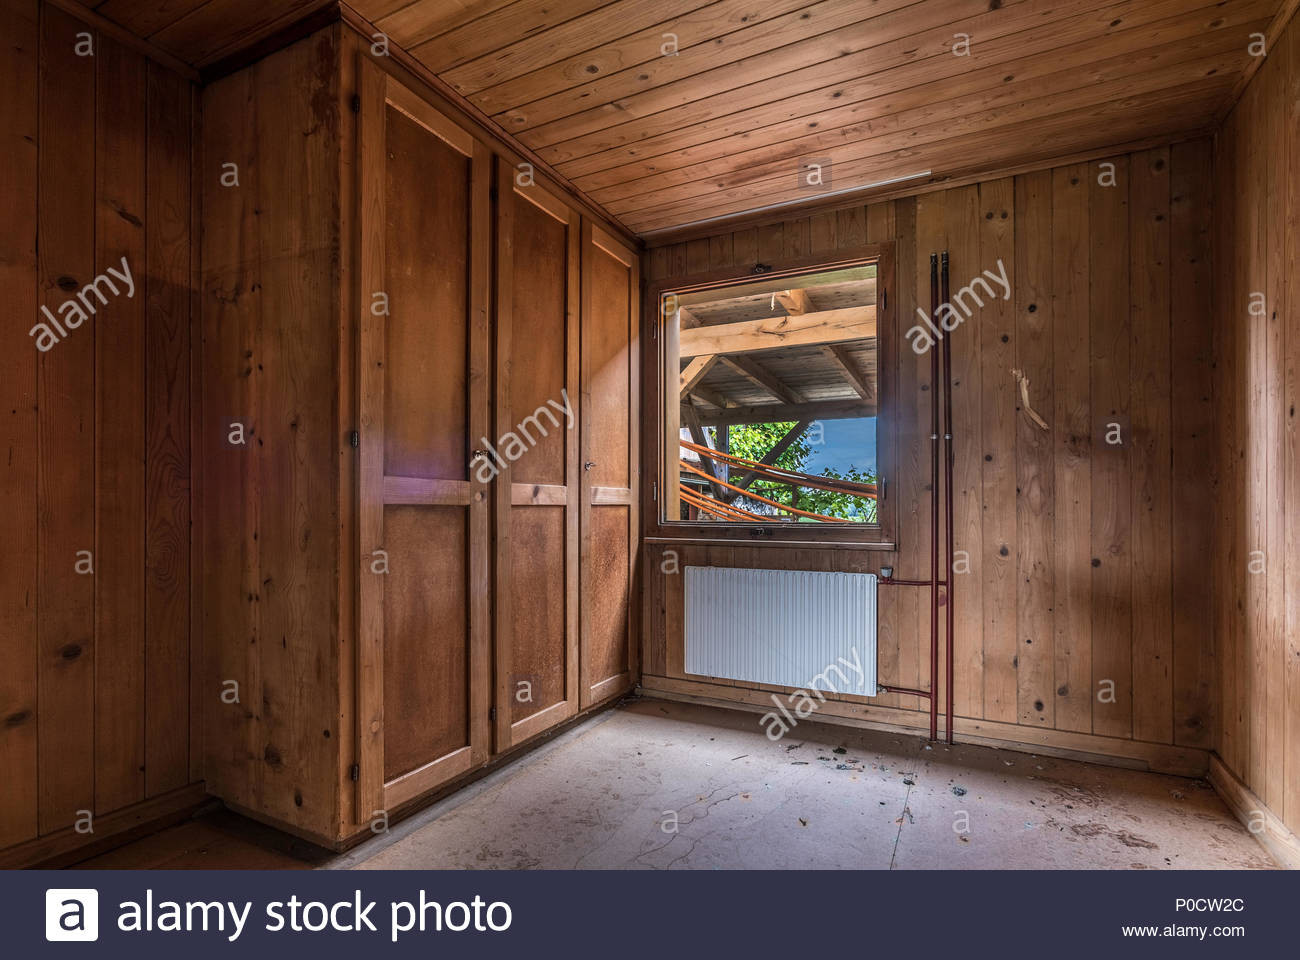 jacobean bamboo hardwood flooring of wood paneled interior stock photos wood paneled interior stock intended for a room paneled with wood in a house that will be demolished stock image